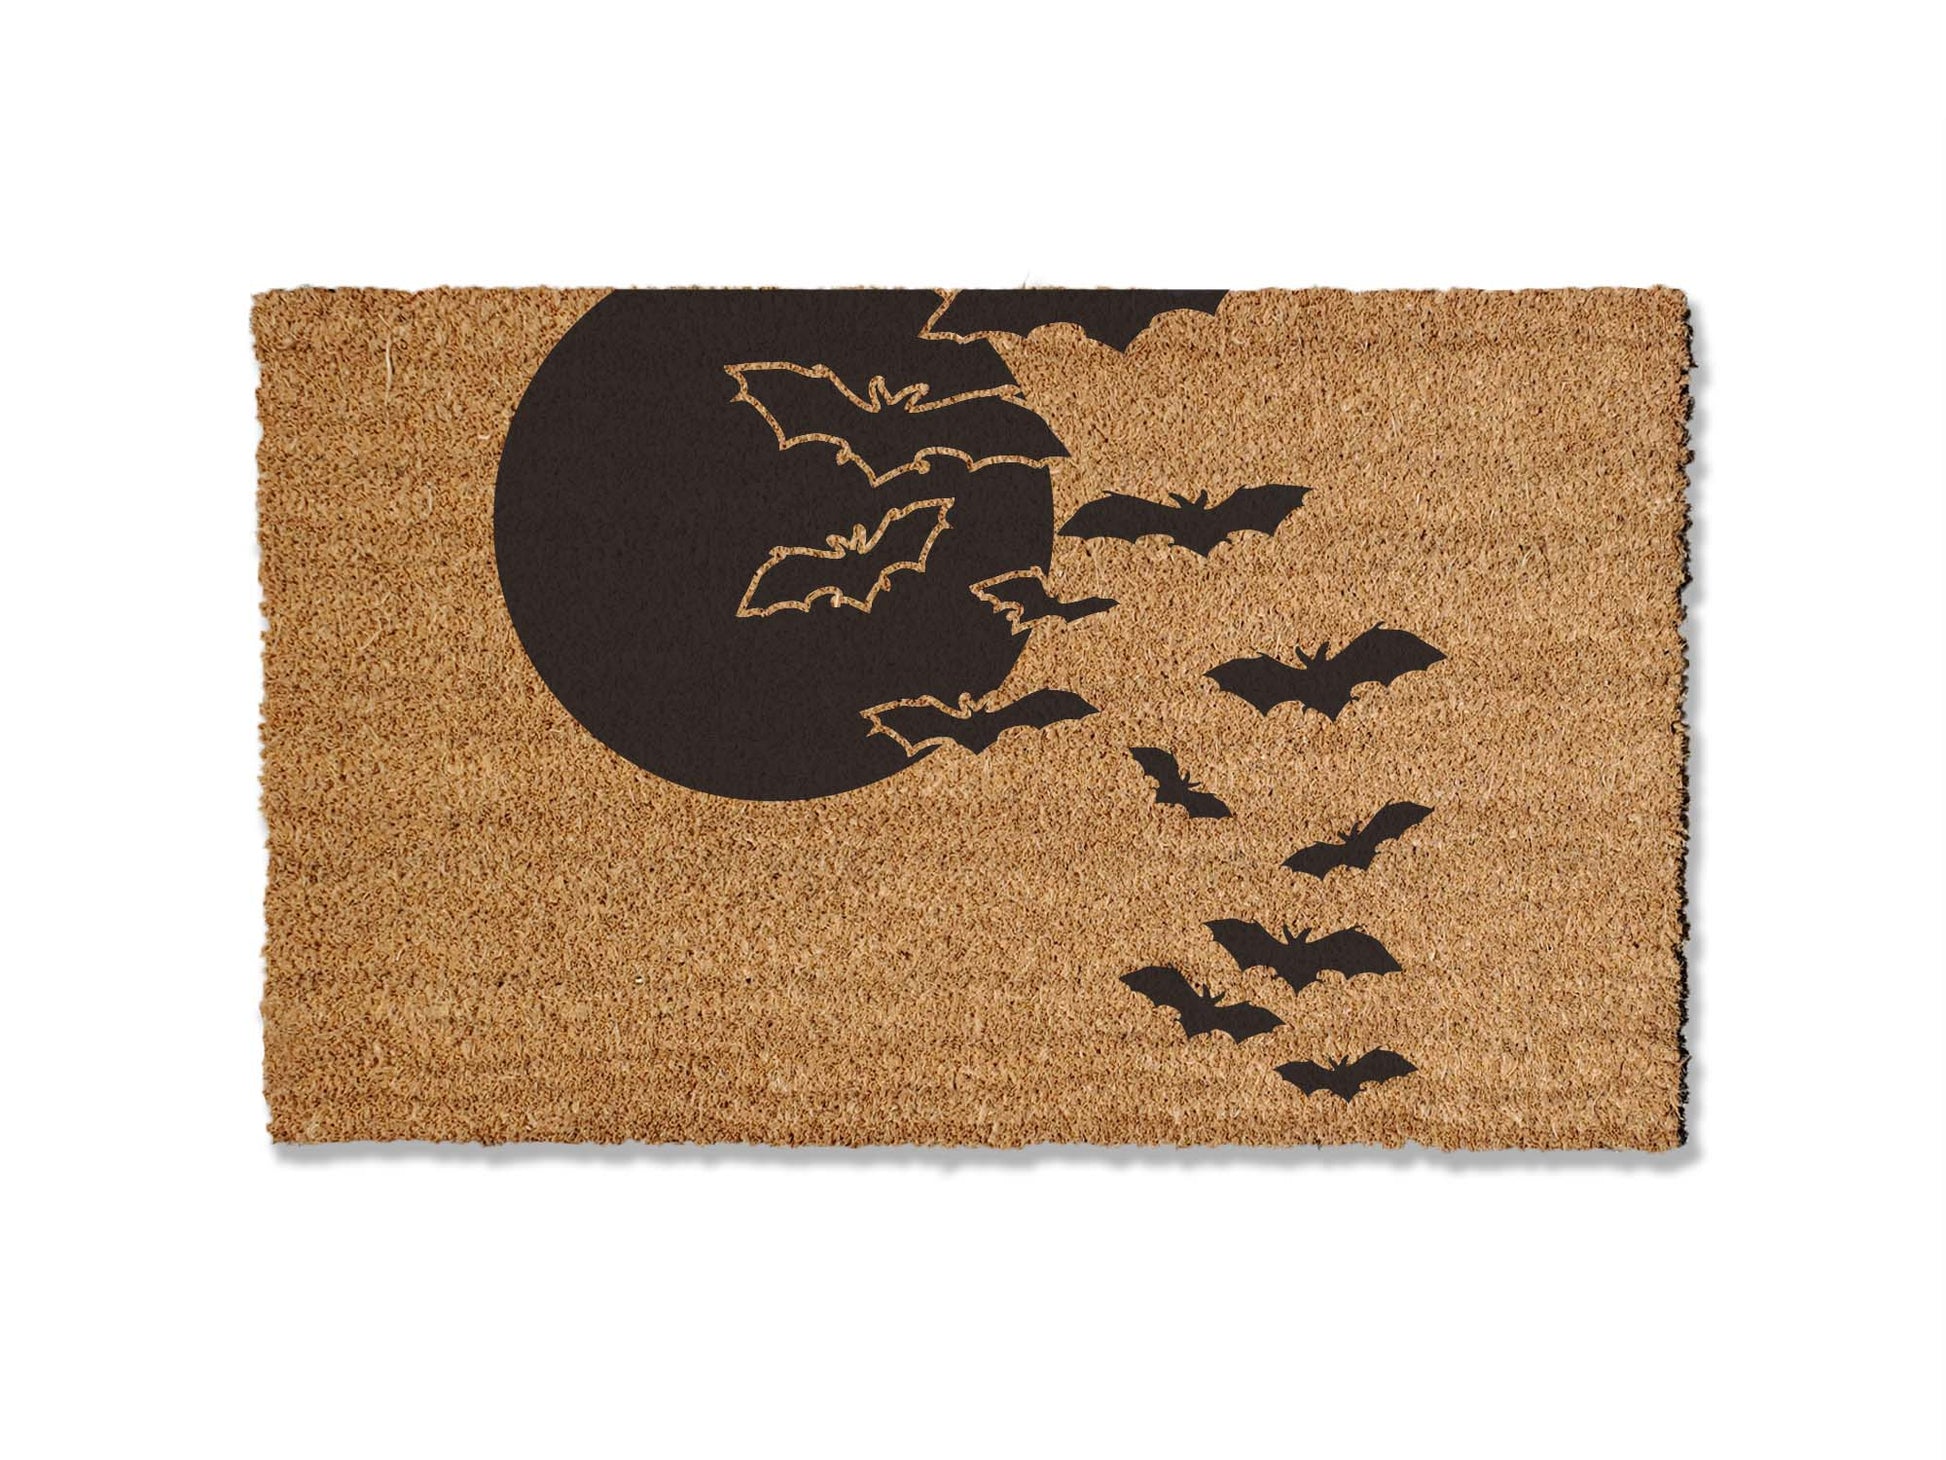 A coir doormat that is 18 inches by 30 inches and has a colony of bats flying towards a full moon painted on it.